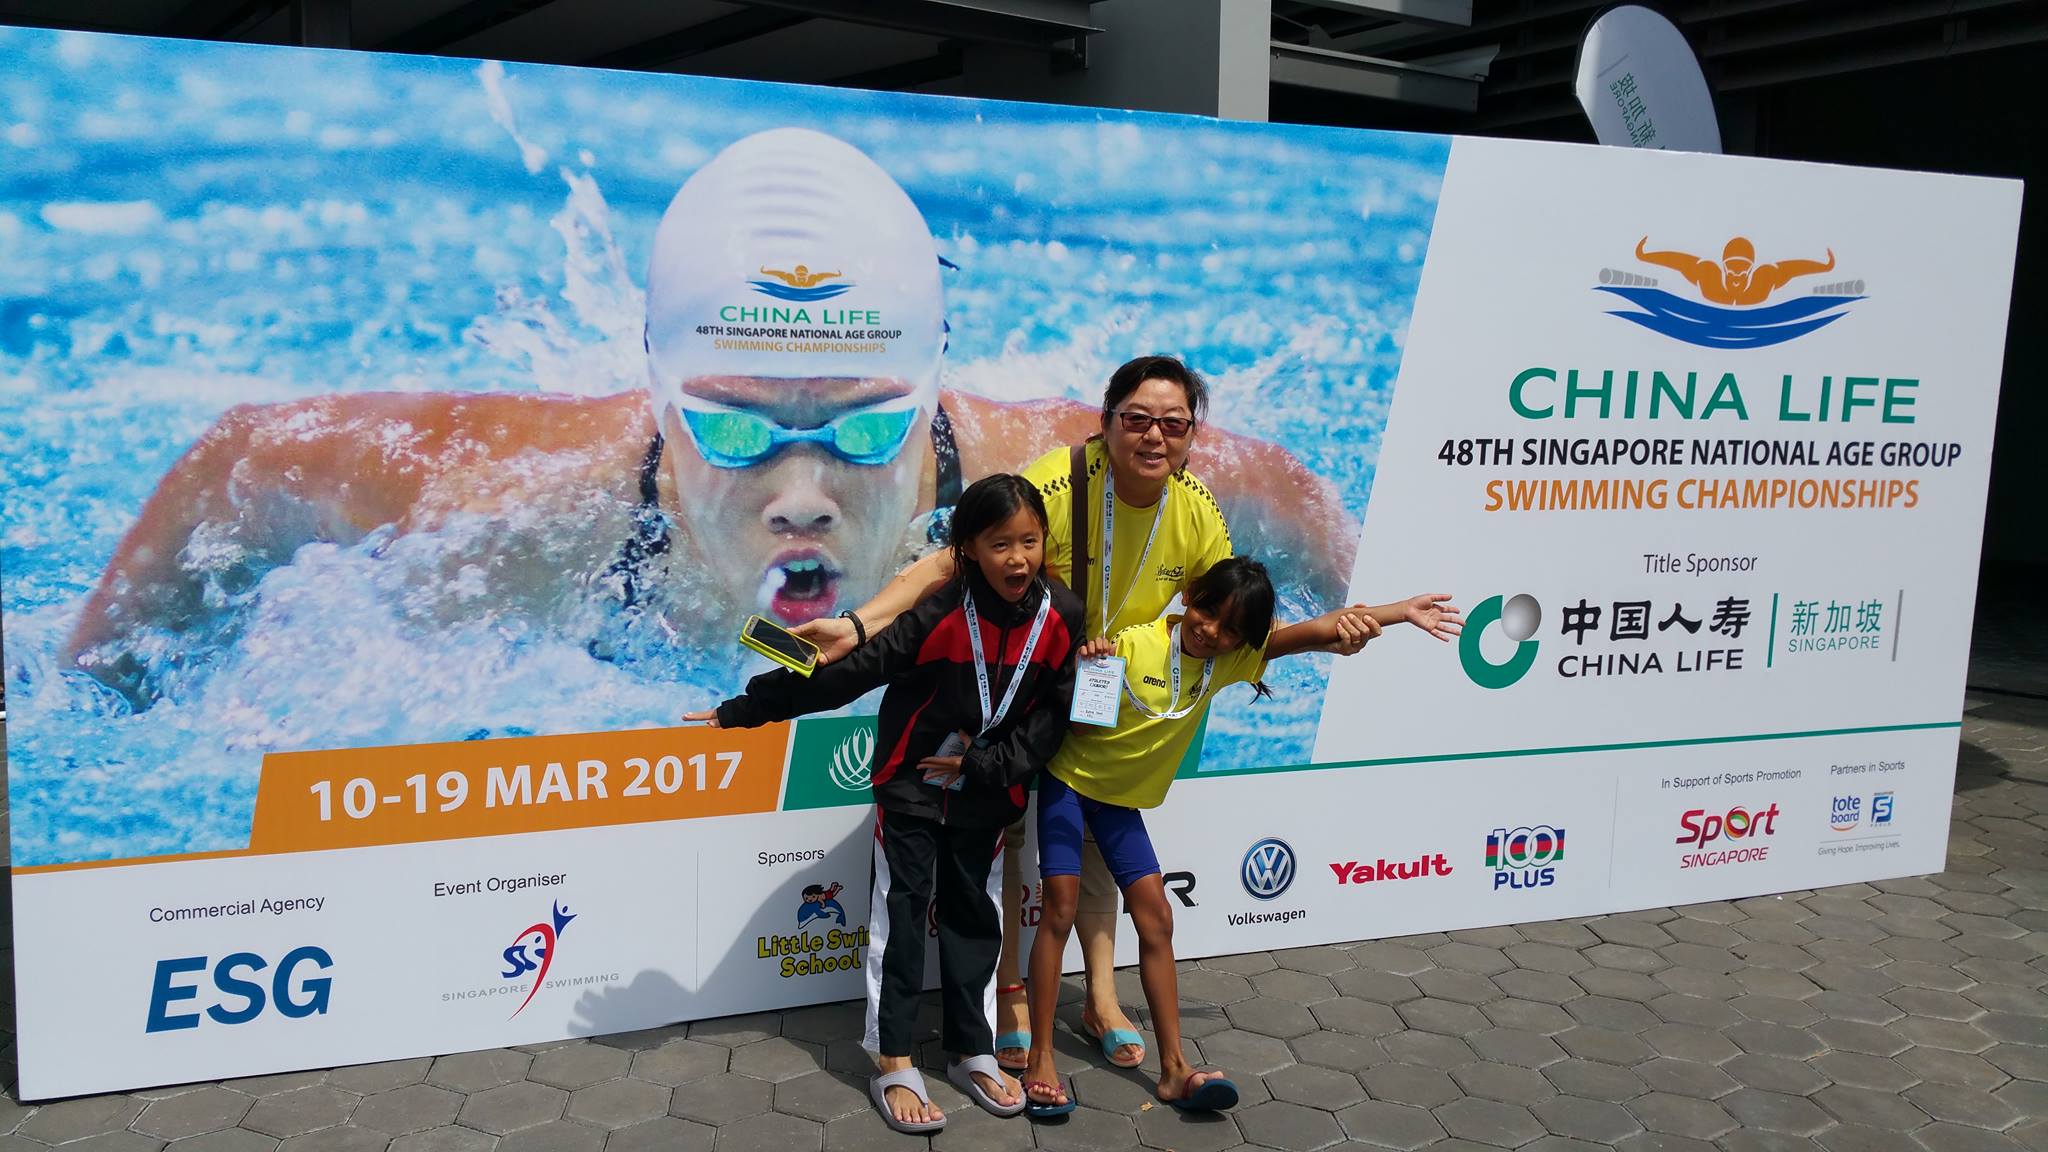 China Life Insurance Singapore makes a splash as new title sponsor of the 48th Singapore National Age Group Swimming Championships